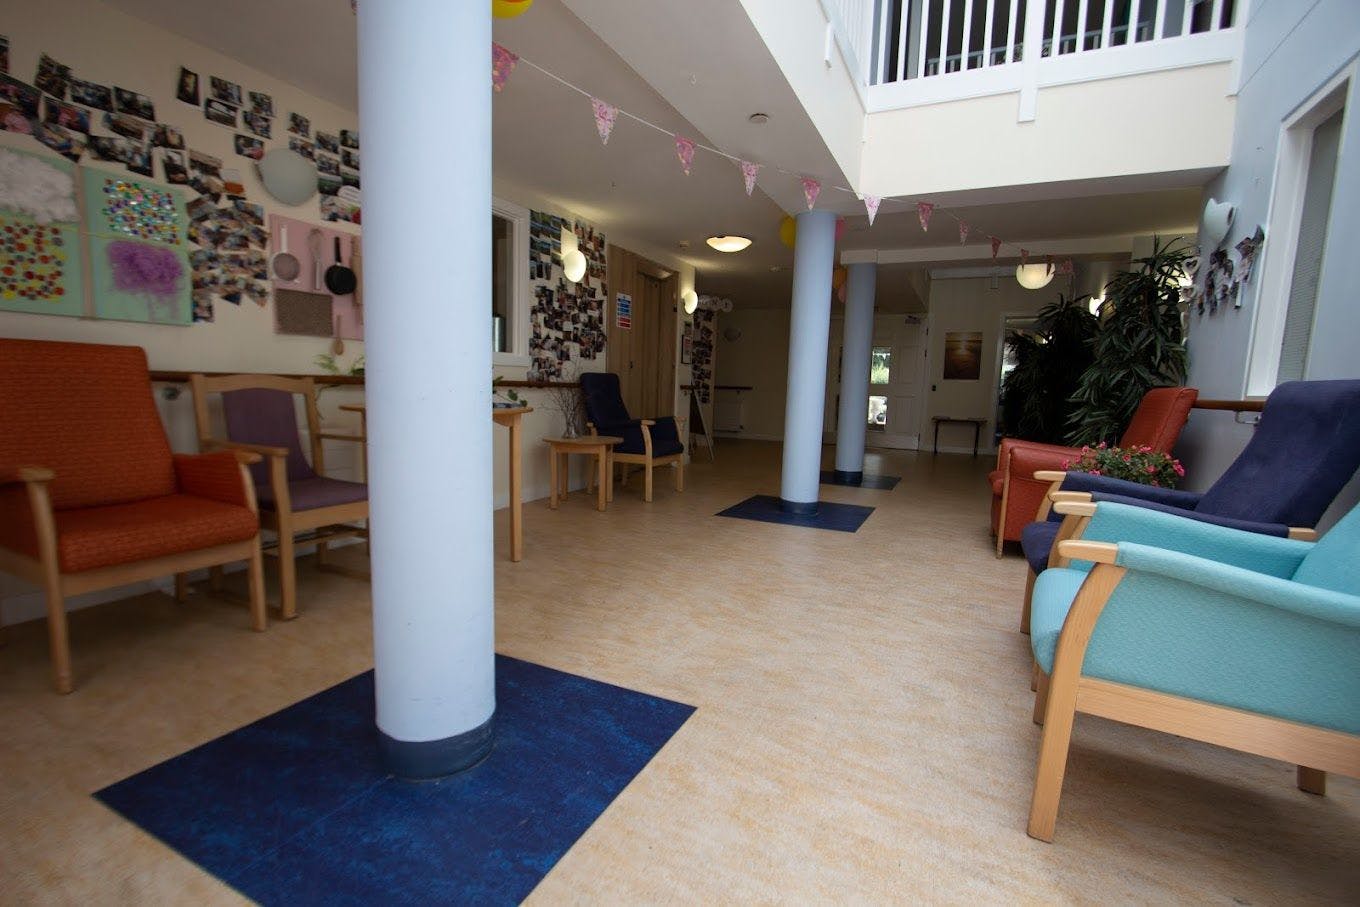 Shaw Healthcare - Rotherlea care home 002